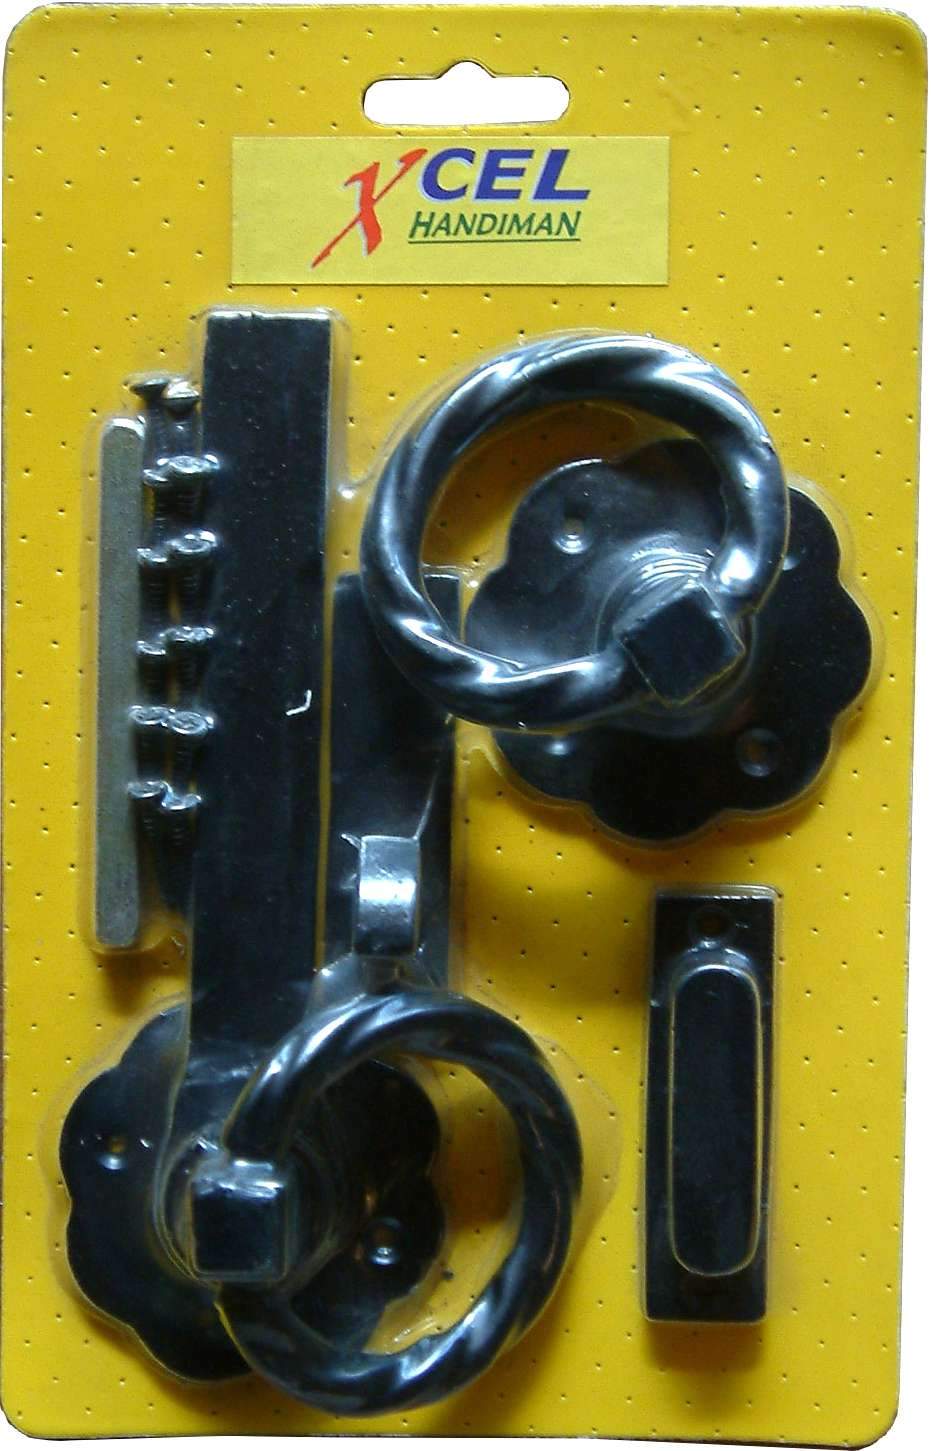 Quality Metal Twisted Ring Gate Latch or Door Latch Set Twisted Black Iron  - Etsy